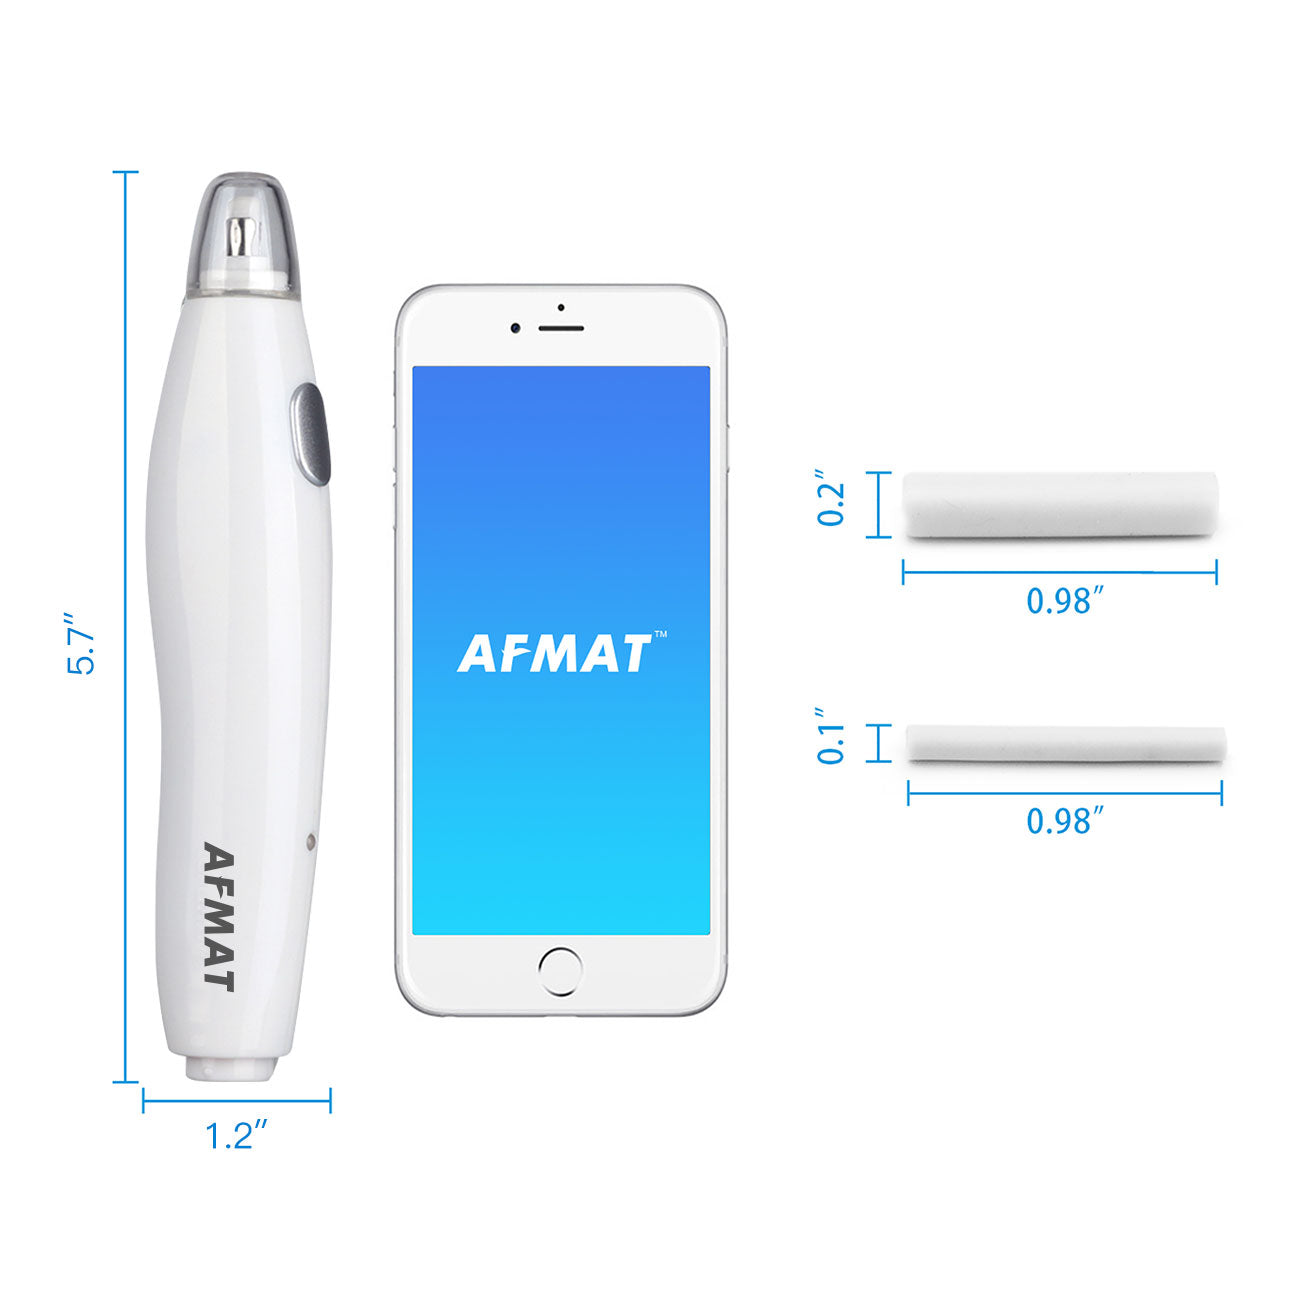 AFMAT Electric Eraser, 140 Eraser Refills, Electric Pencil Eraser Rechargeable for Artists, Electric Erasers for Drafting, Drawing, Pa